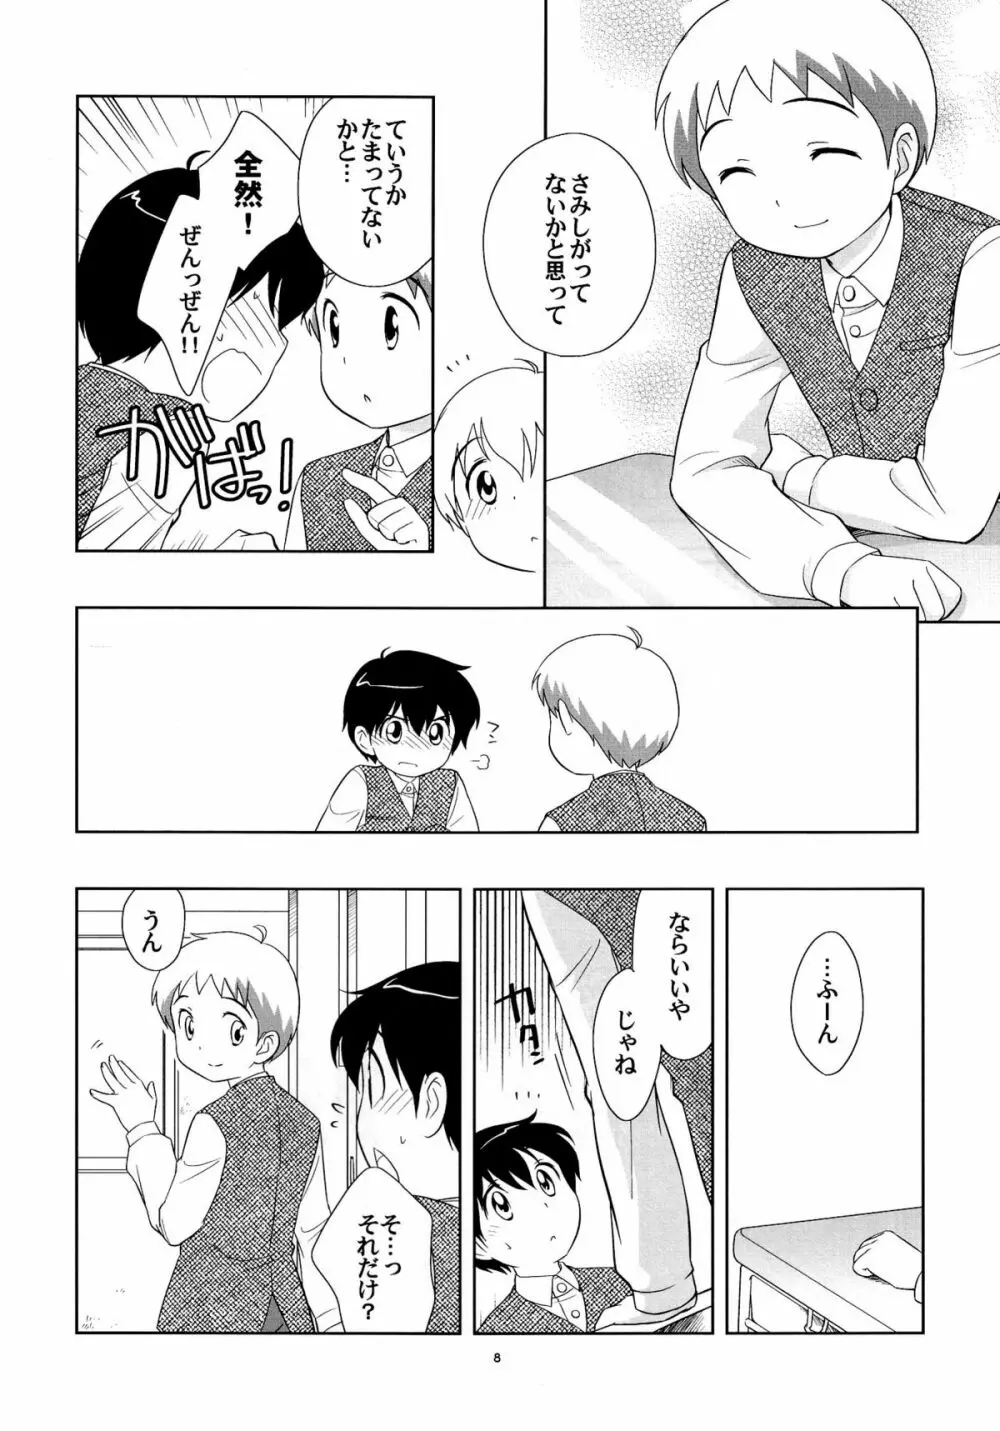 the Slave driver at school Again 2年目もあそぼ! - page7